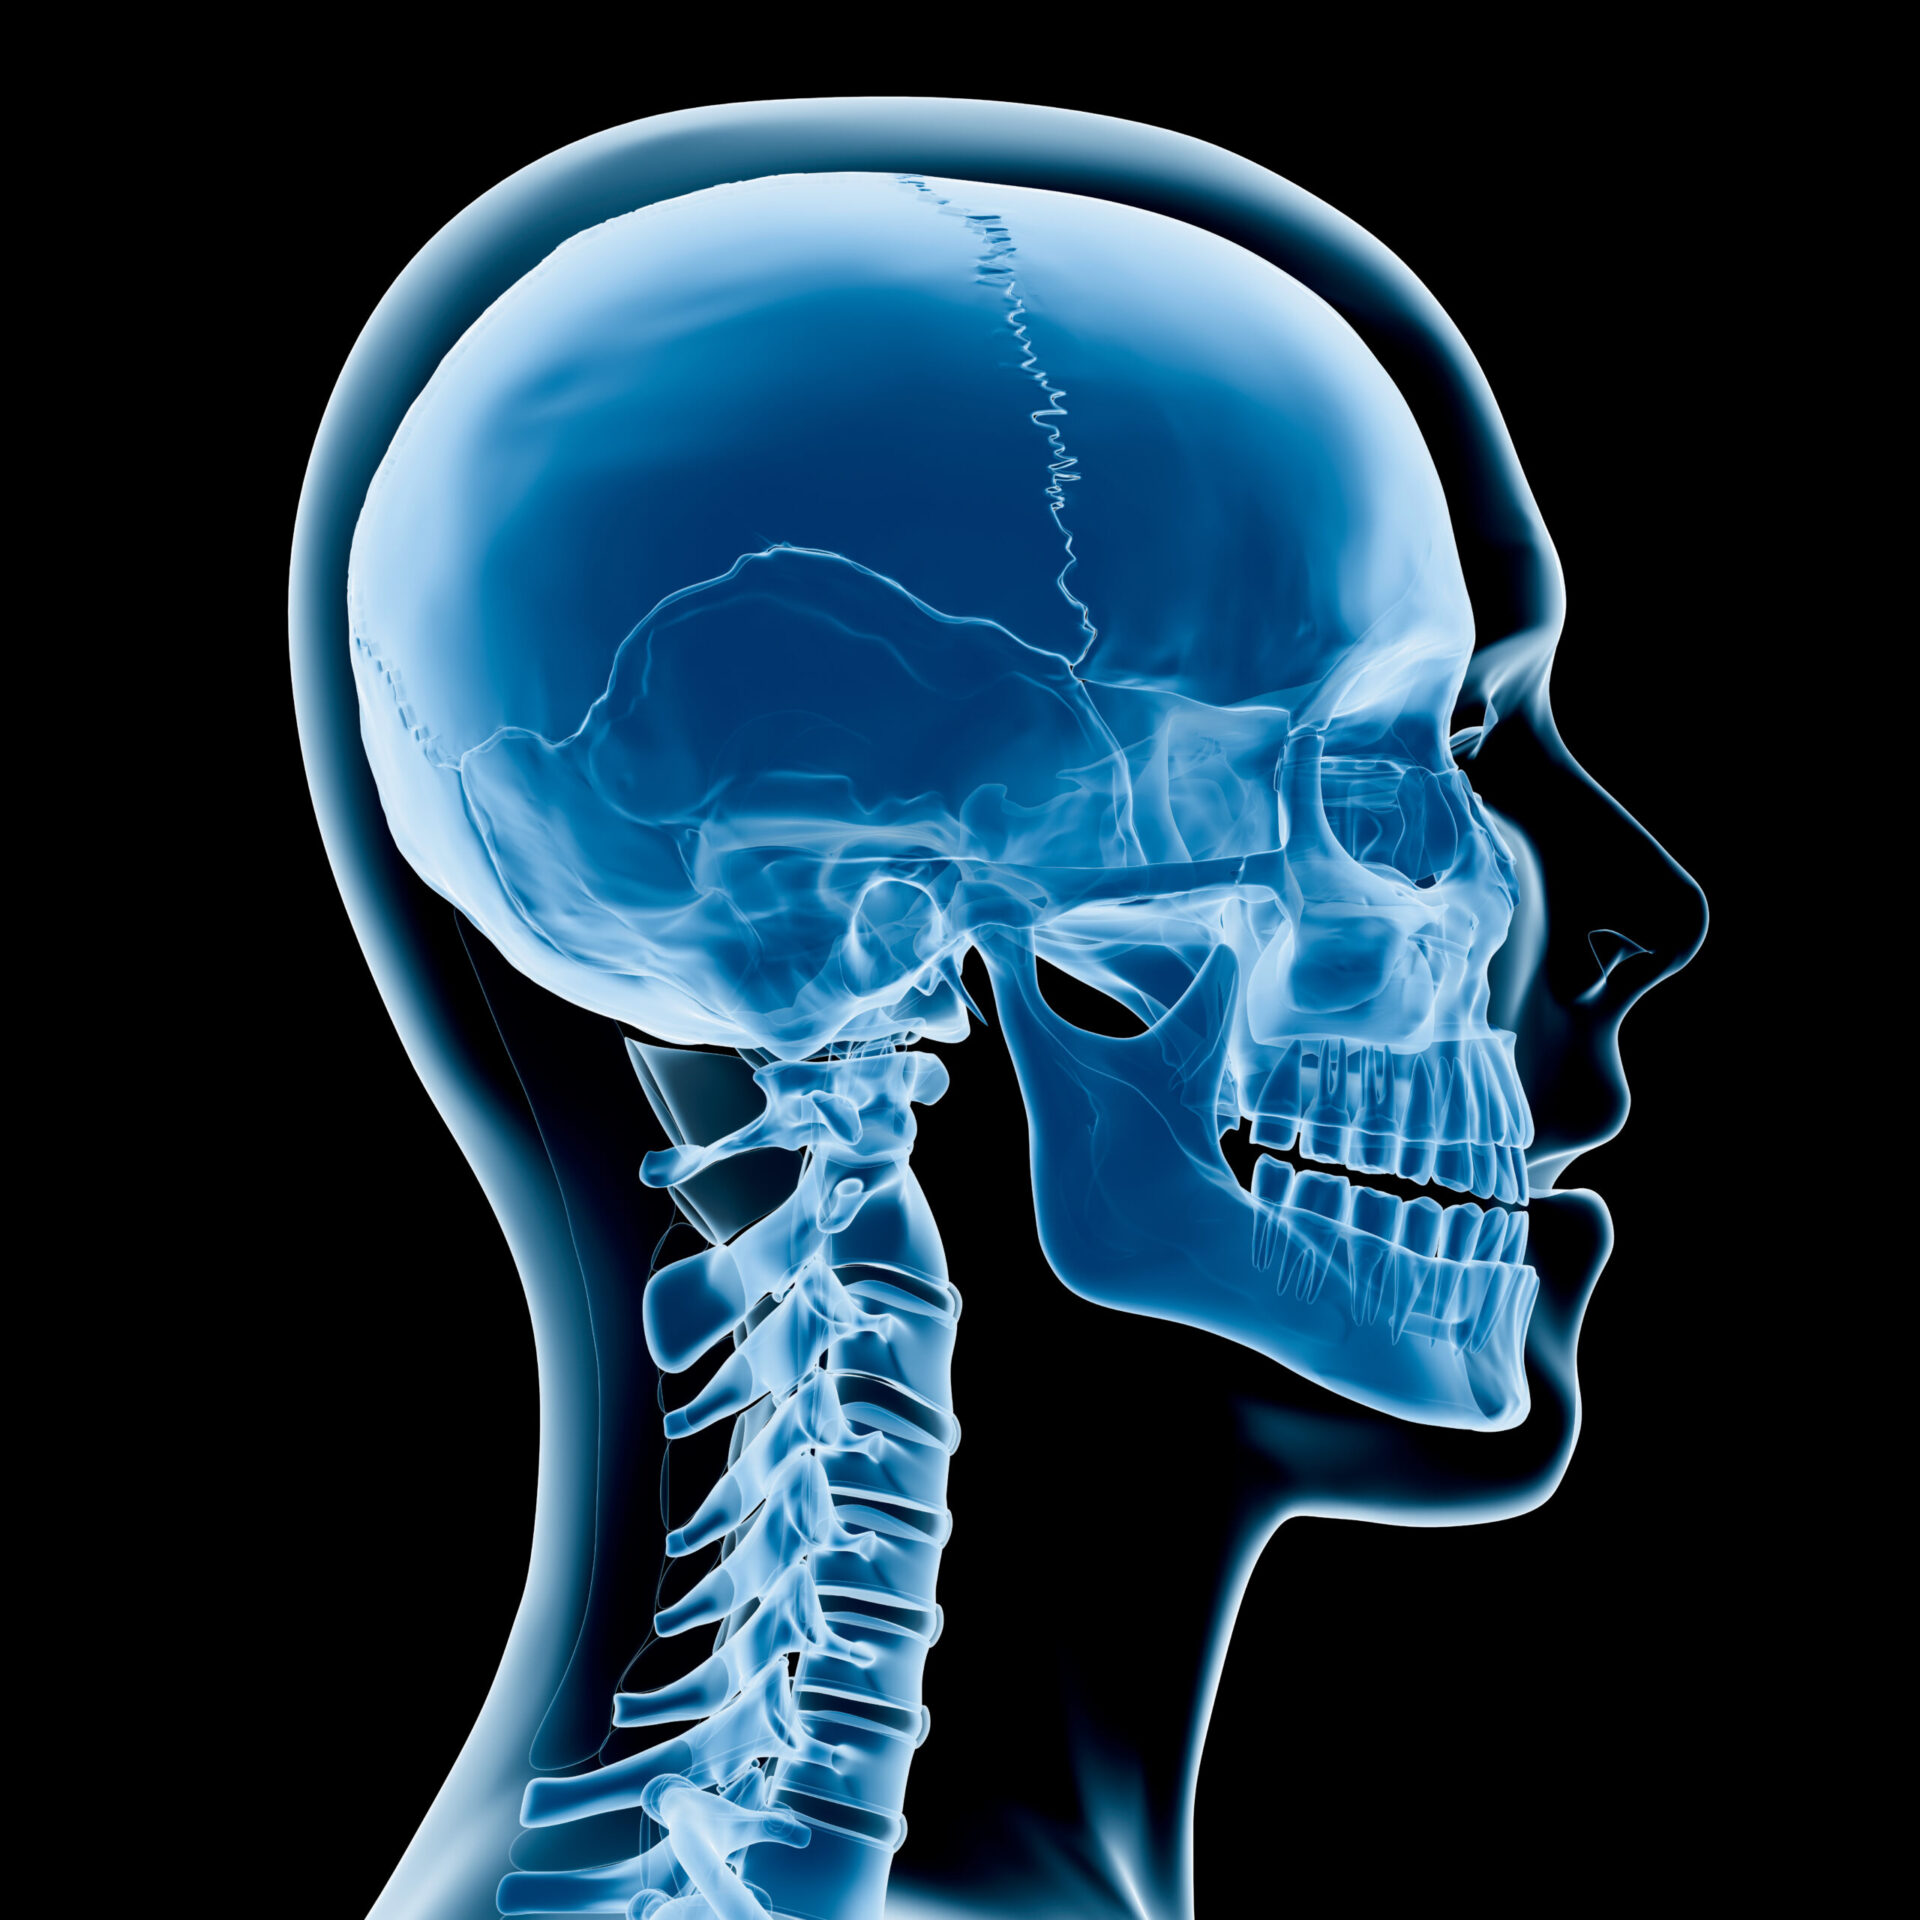 Digital medical illustration: Lateral (side) x-ray view (orthogonal) of human skull and neck. Featuring: